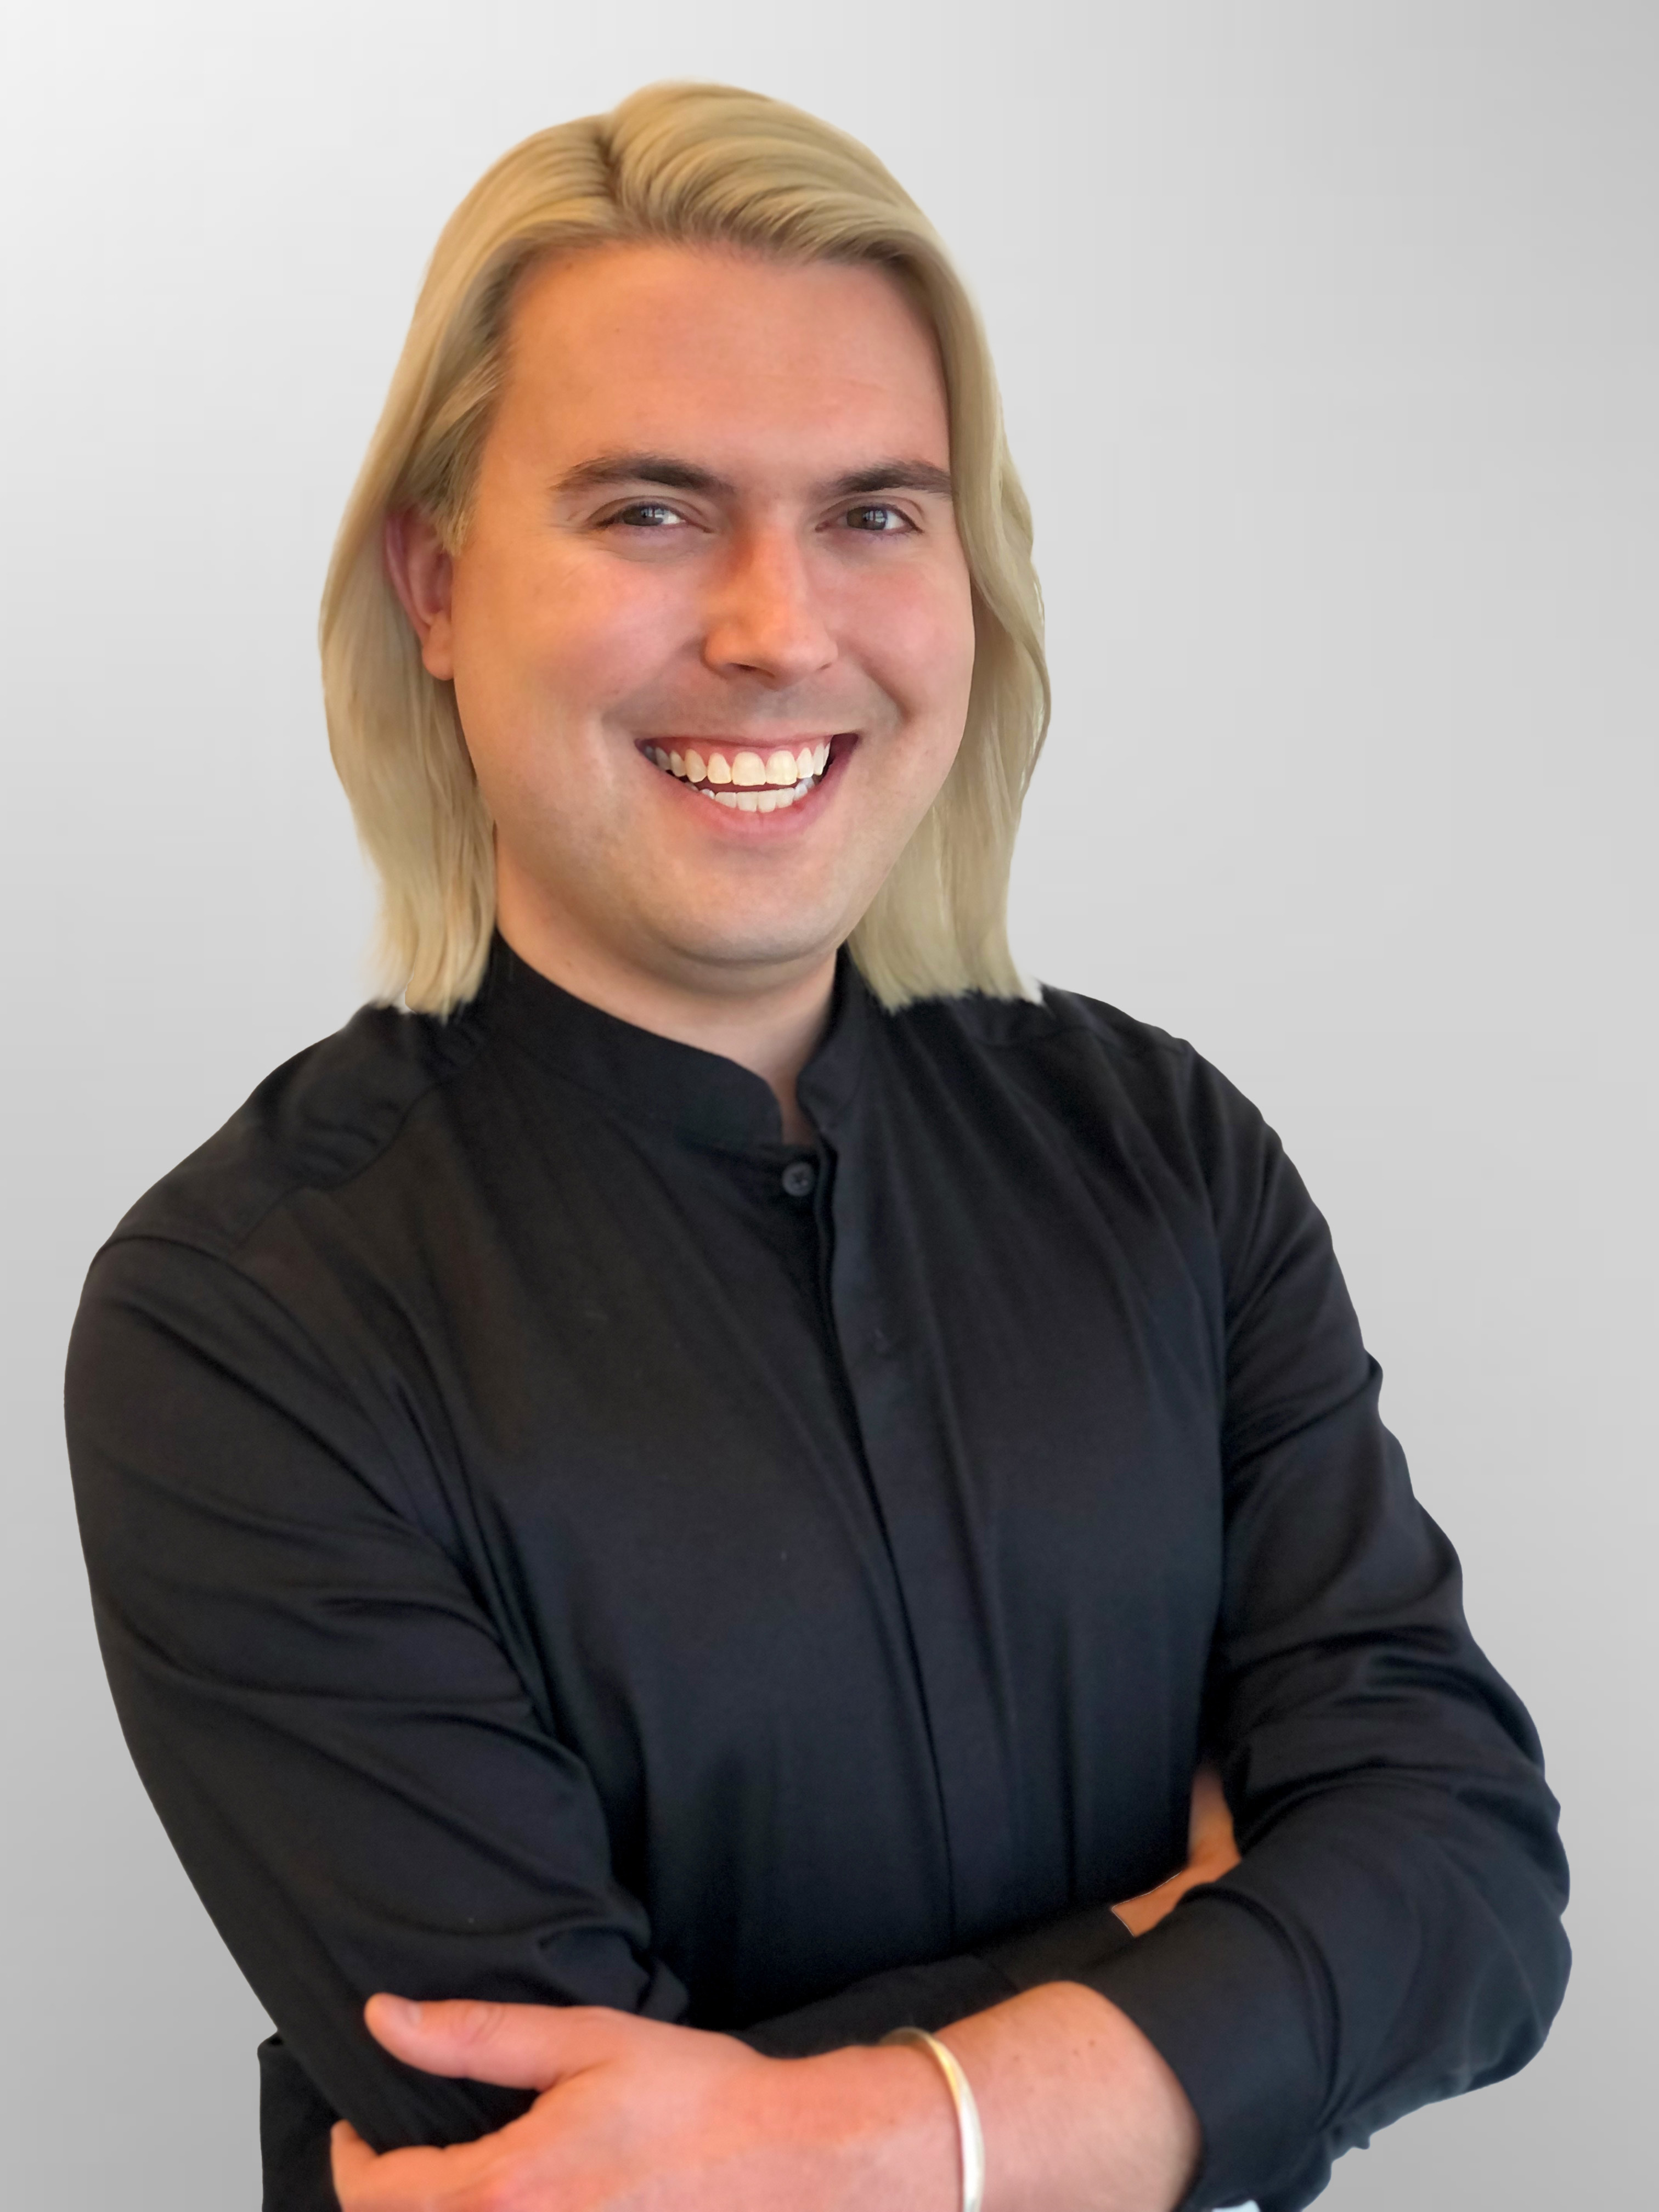 A person with shoulder-length blonde hair wearing a black shirt